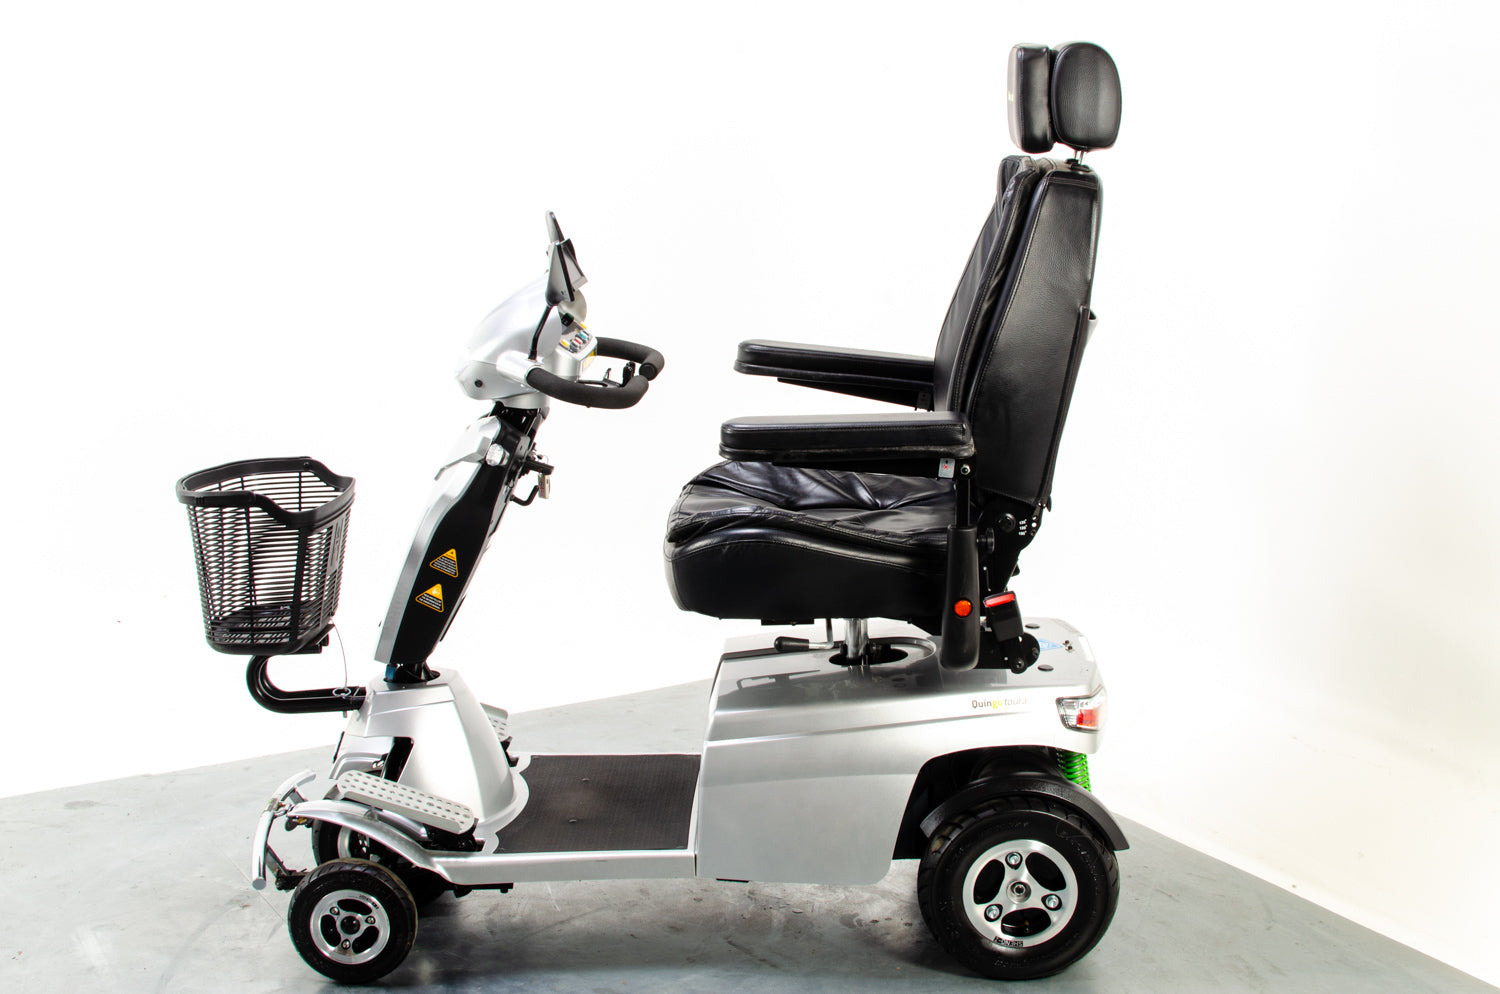 Quingo Toura 2 Used Mobility Scooter Large 5 Wheel All Terrain 8mph AVC